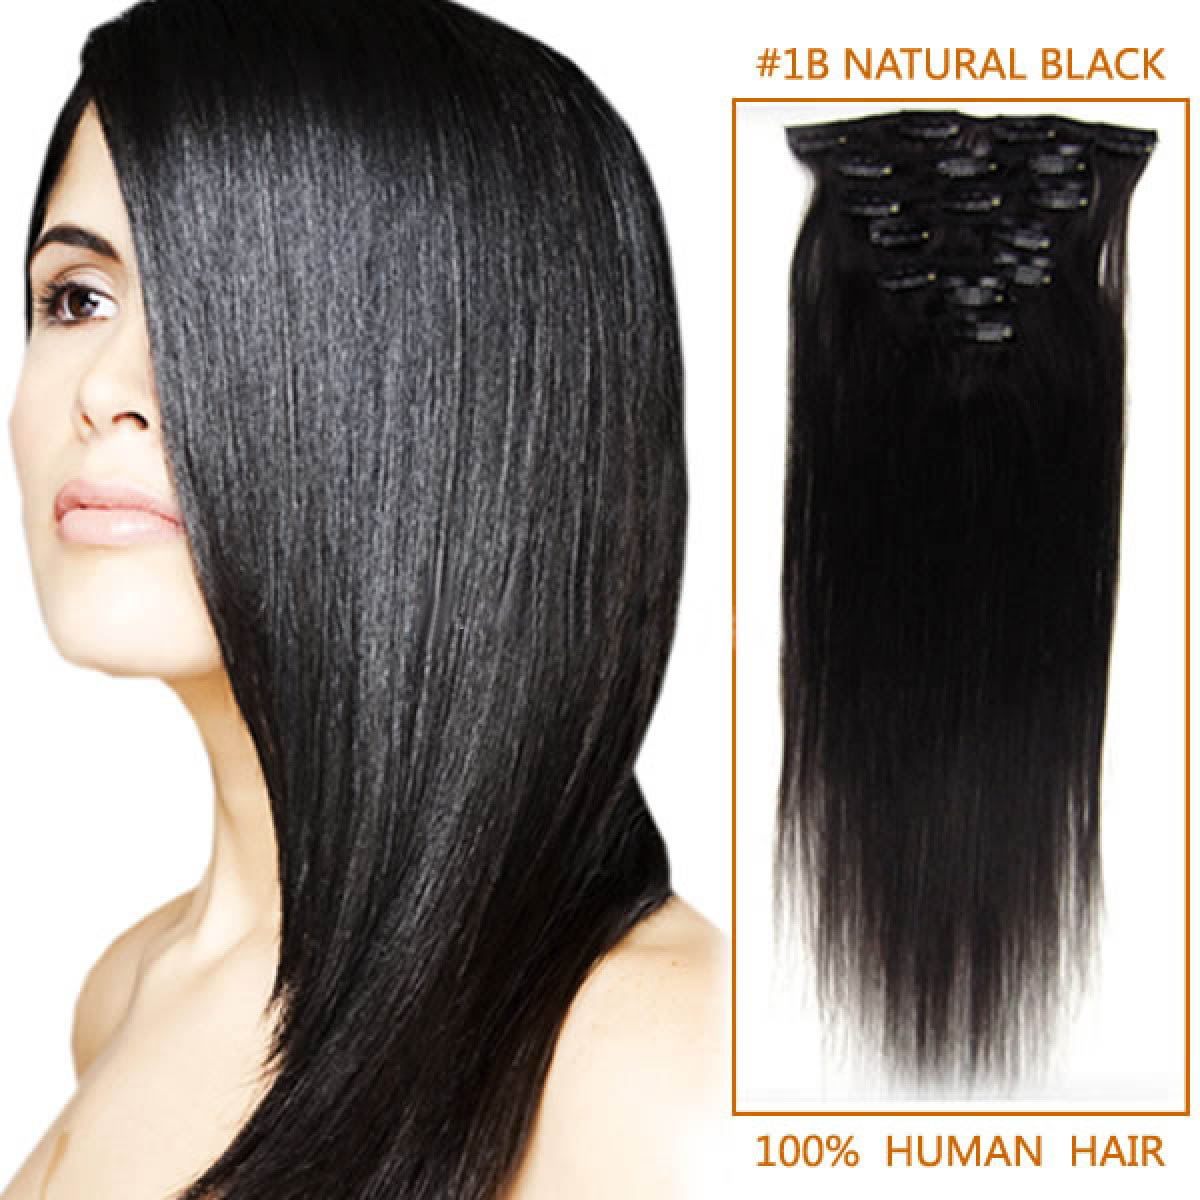 Is Ells Hair Extensions Salon Best for Nano Tip Bond Hair Extensions? by  Ells Hair Extensions - Issuu